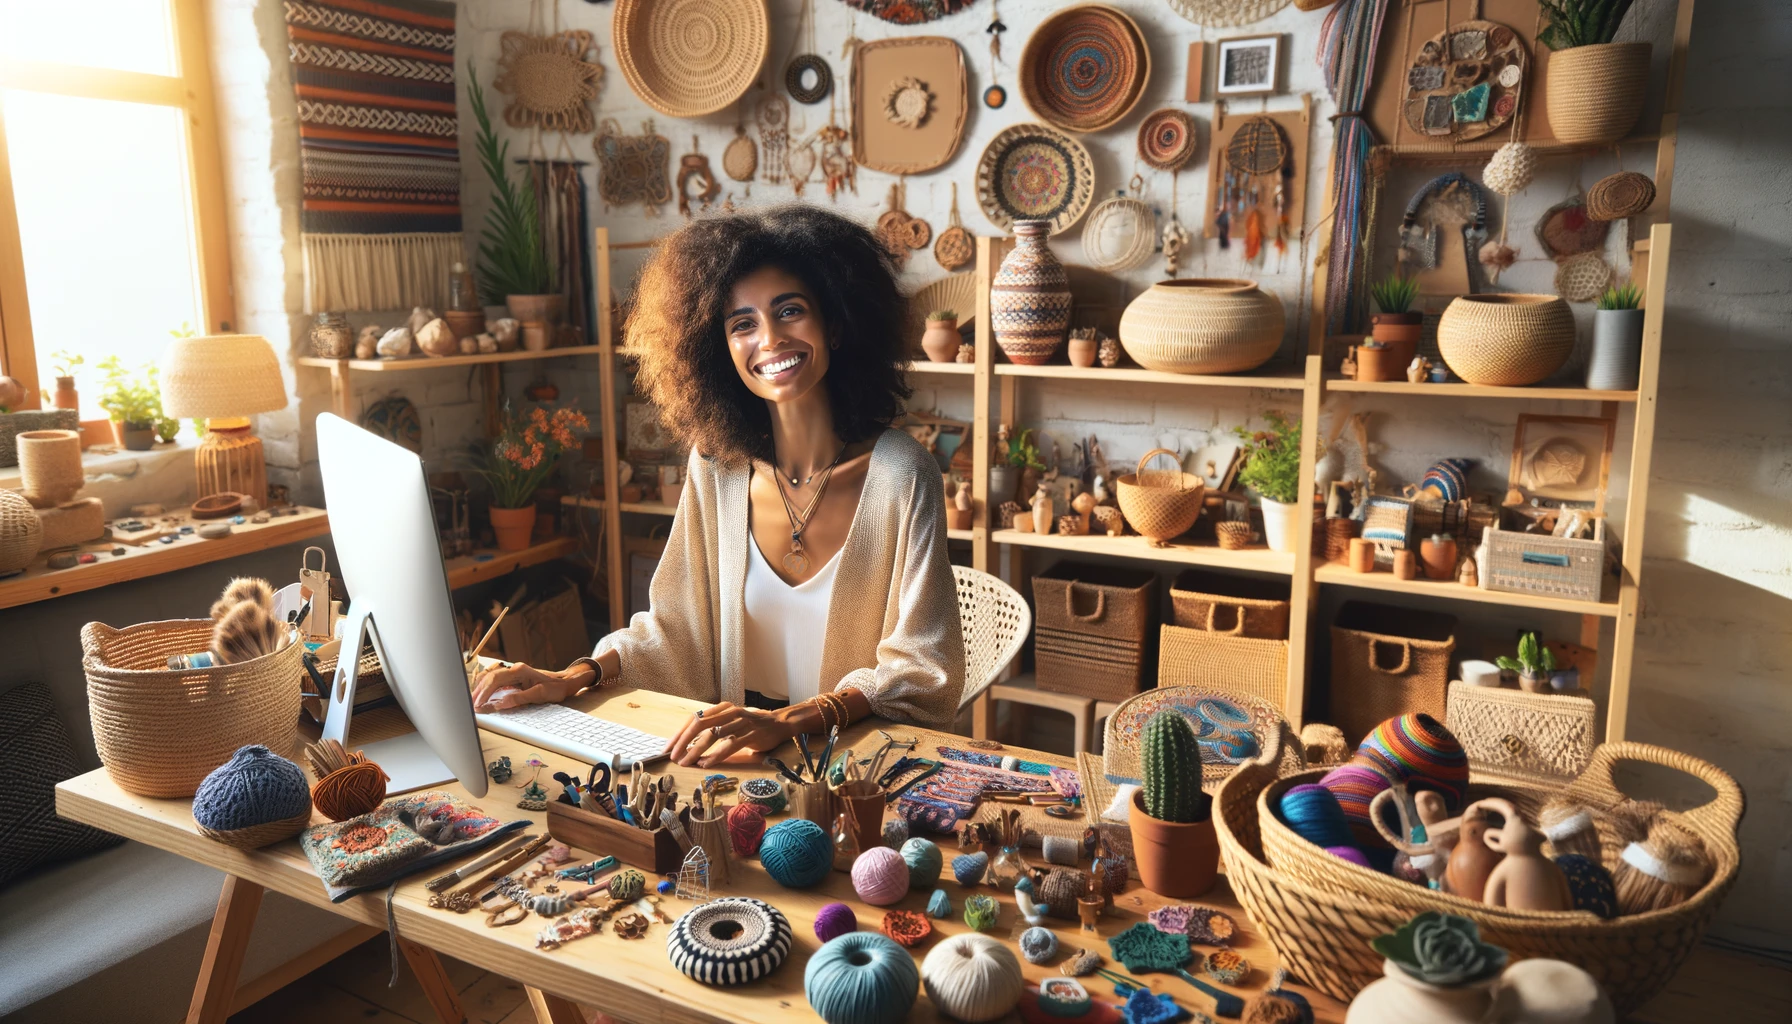 A joyful female entrepreneur of mixed descent is working on her Etsy store at her computer in a craft-rich home office. The office is densely decorated with an abundance of handmade crafts, such as woven baskets, ceramic vases, colorful textiles, and small sculptures, emphasizing the artisanal nature of her business. She's wearing a comfortable yet trendy outfit, with a beaming smile, surrounded by a vibrant and inspiring craft environment. Natural light floods the room, highlighting the intricate details of the crafts. Her desk is a showcase of creativity, with various handcrafted items like unique jewelry pieces, custom art prints, and handmade home decor, representing the eclectic and artistic offerings of her Etsy store.